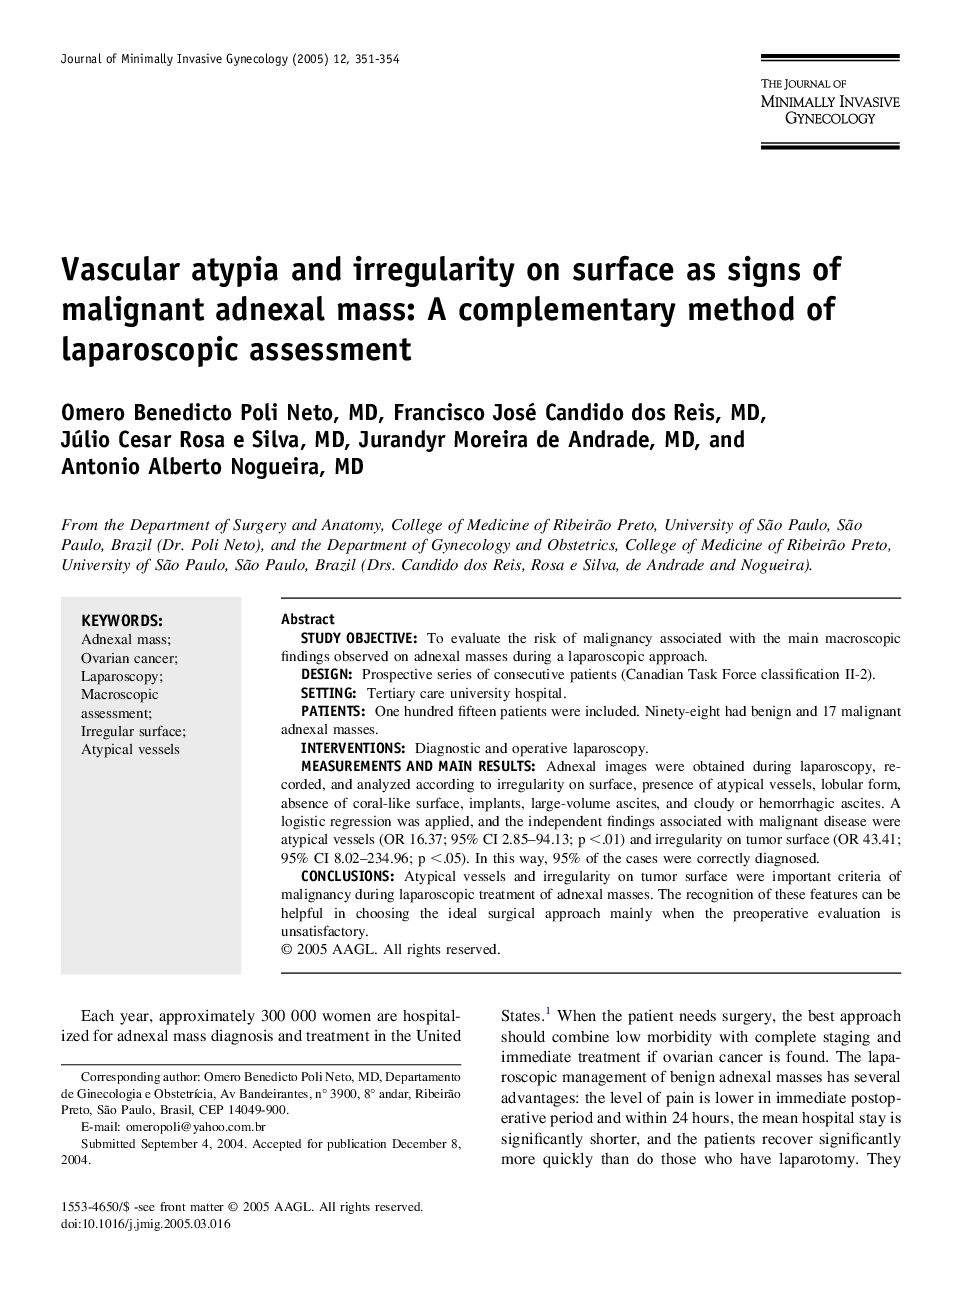 Vascular atypia and irregularity on surface as signs of malignant adnexal mass: A complementary method of laparoscopic assessment